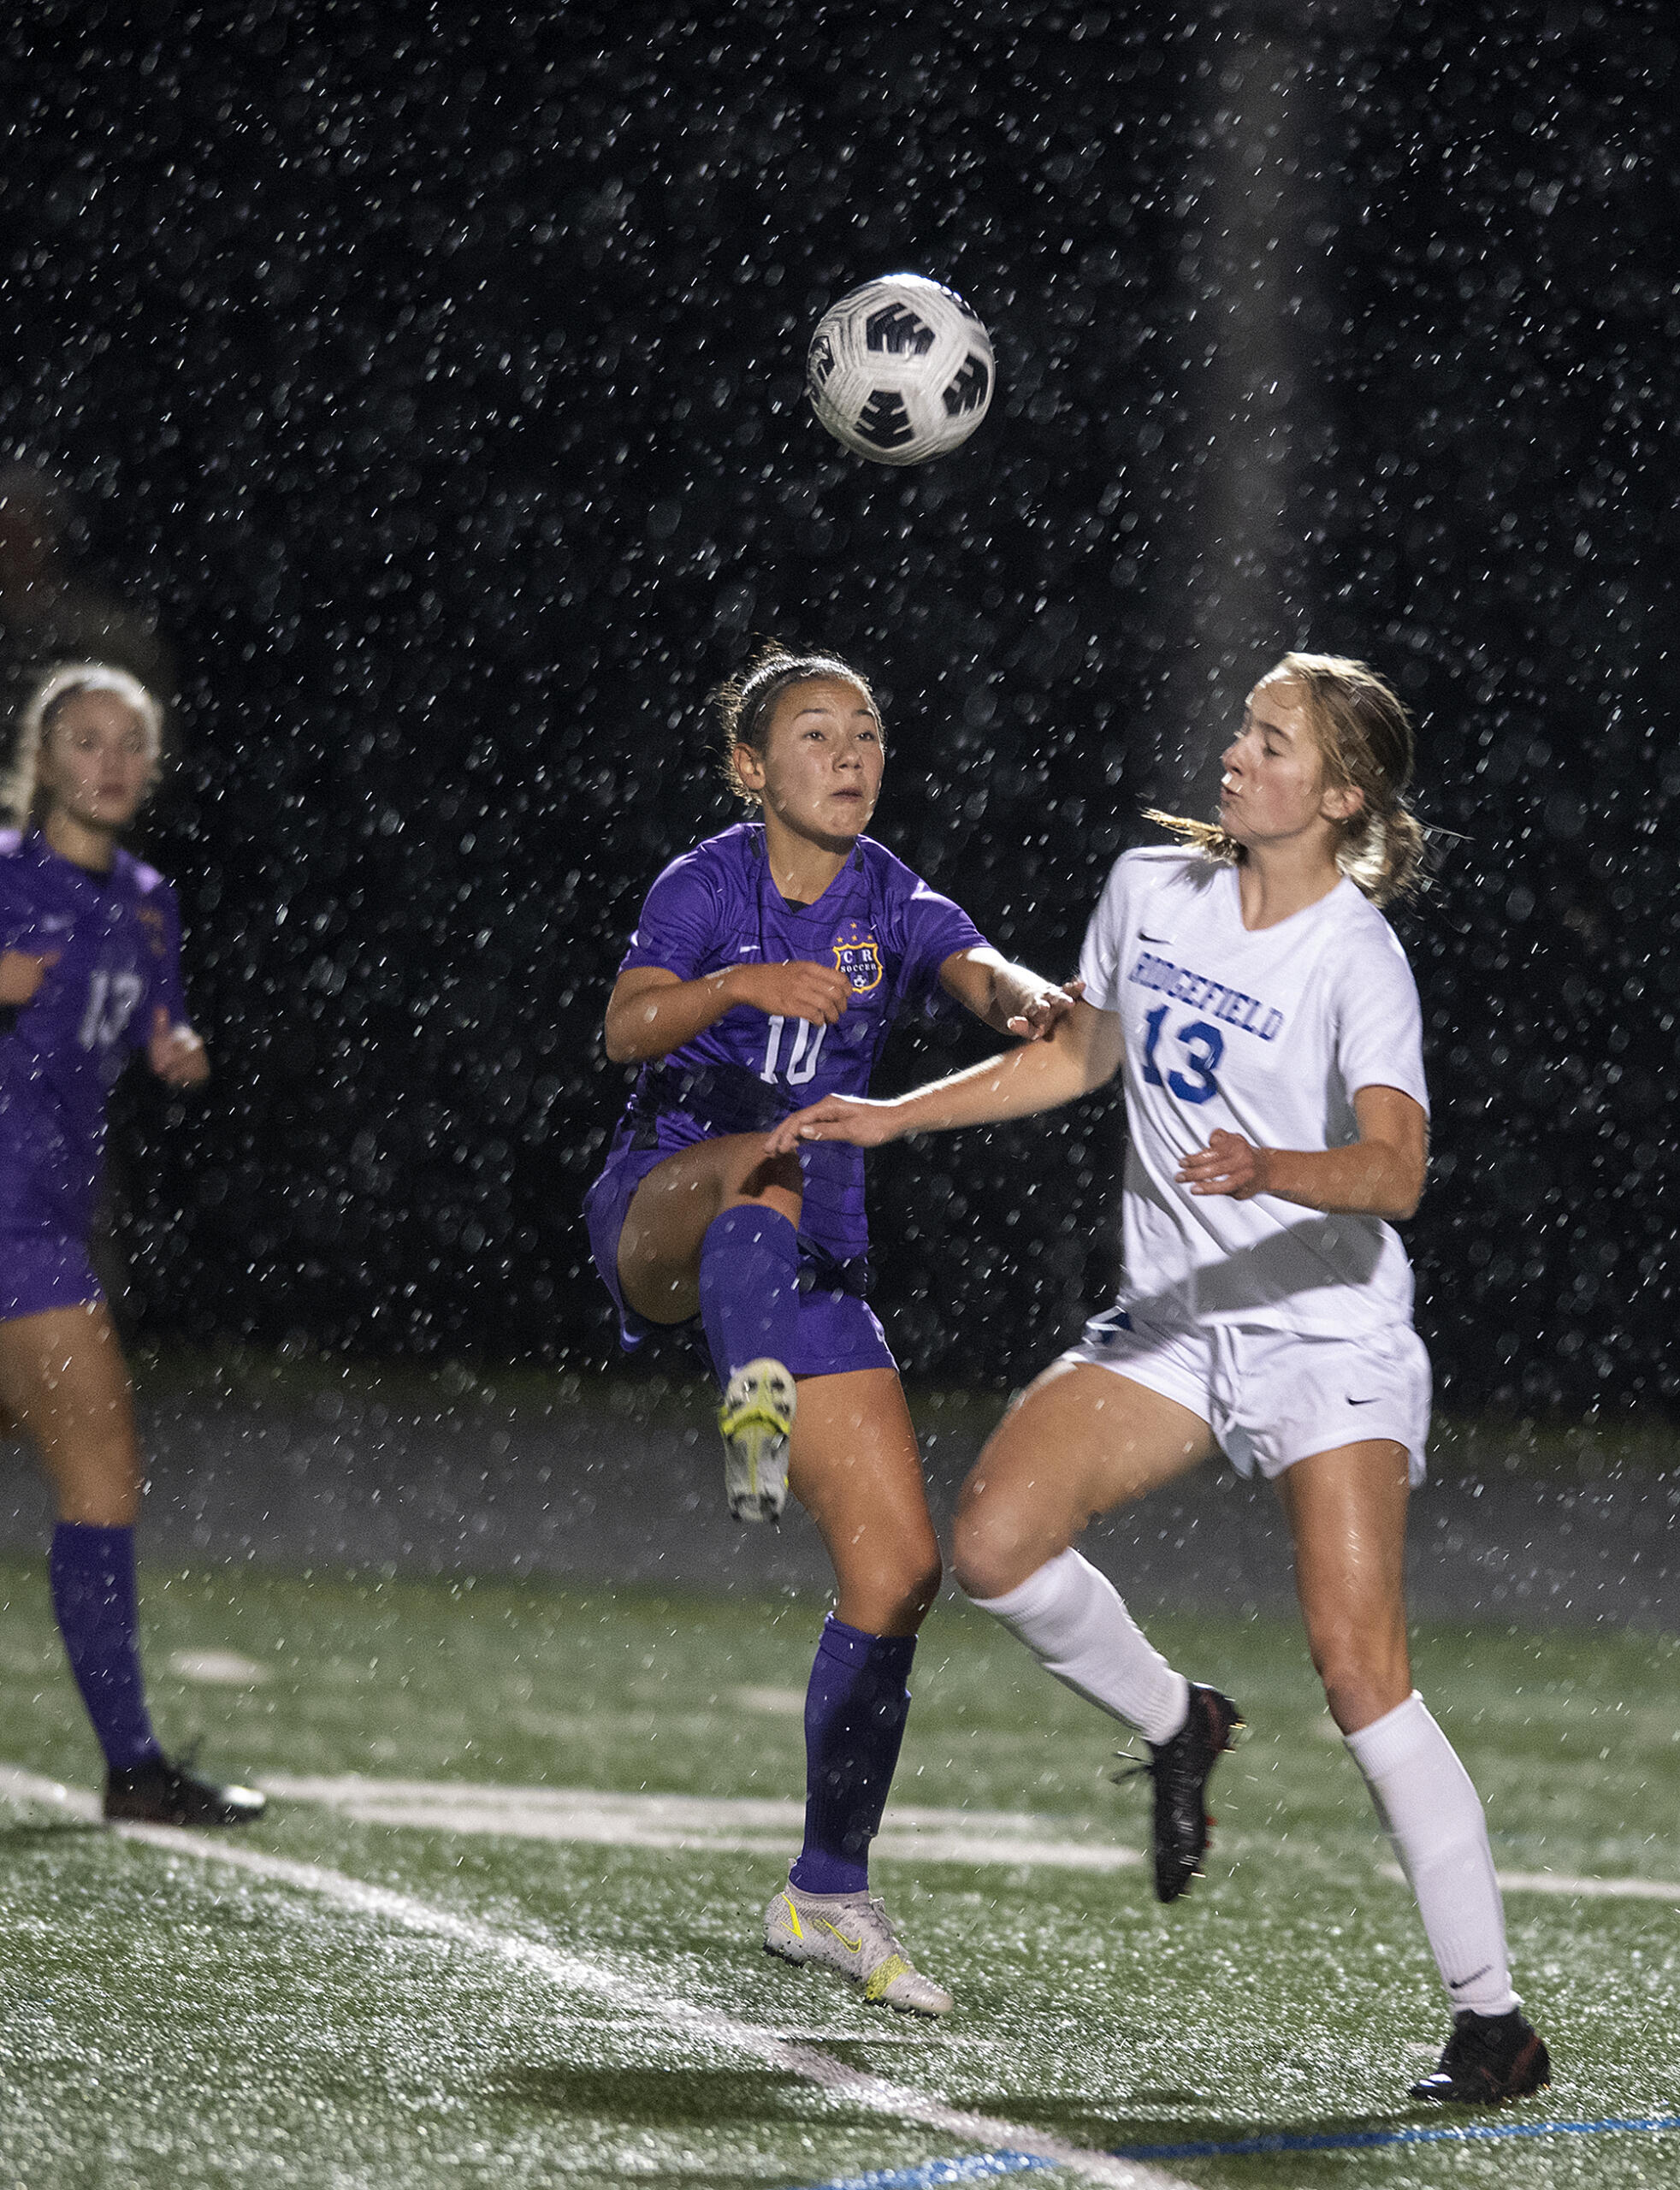 Columbia River's Andie Buckley (10) and Ridgefield's Cameron Jones (13) handle a header in the first half at Columbia River High School on Tuesday night, Oct. 12, 2021.